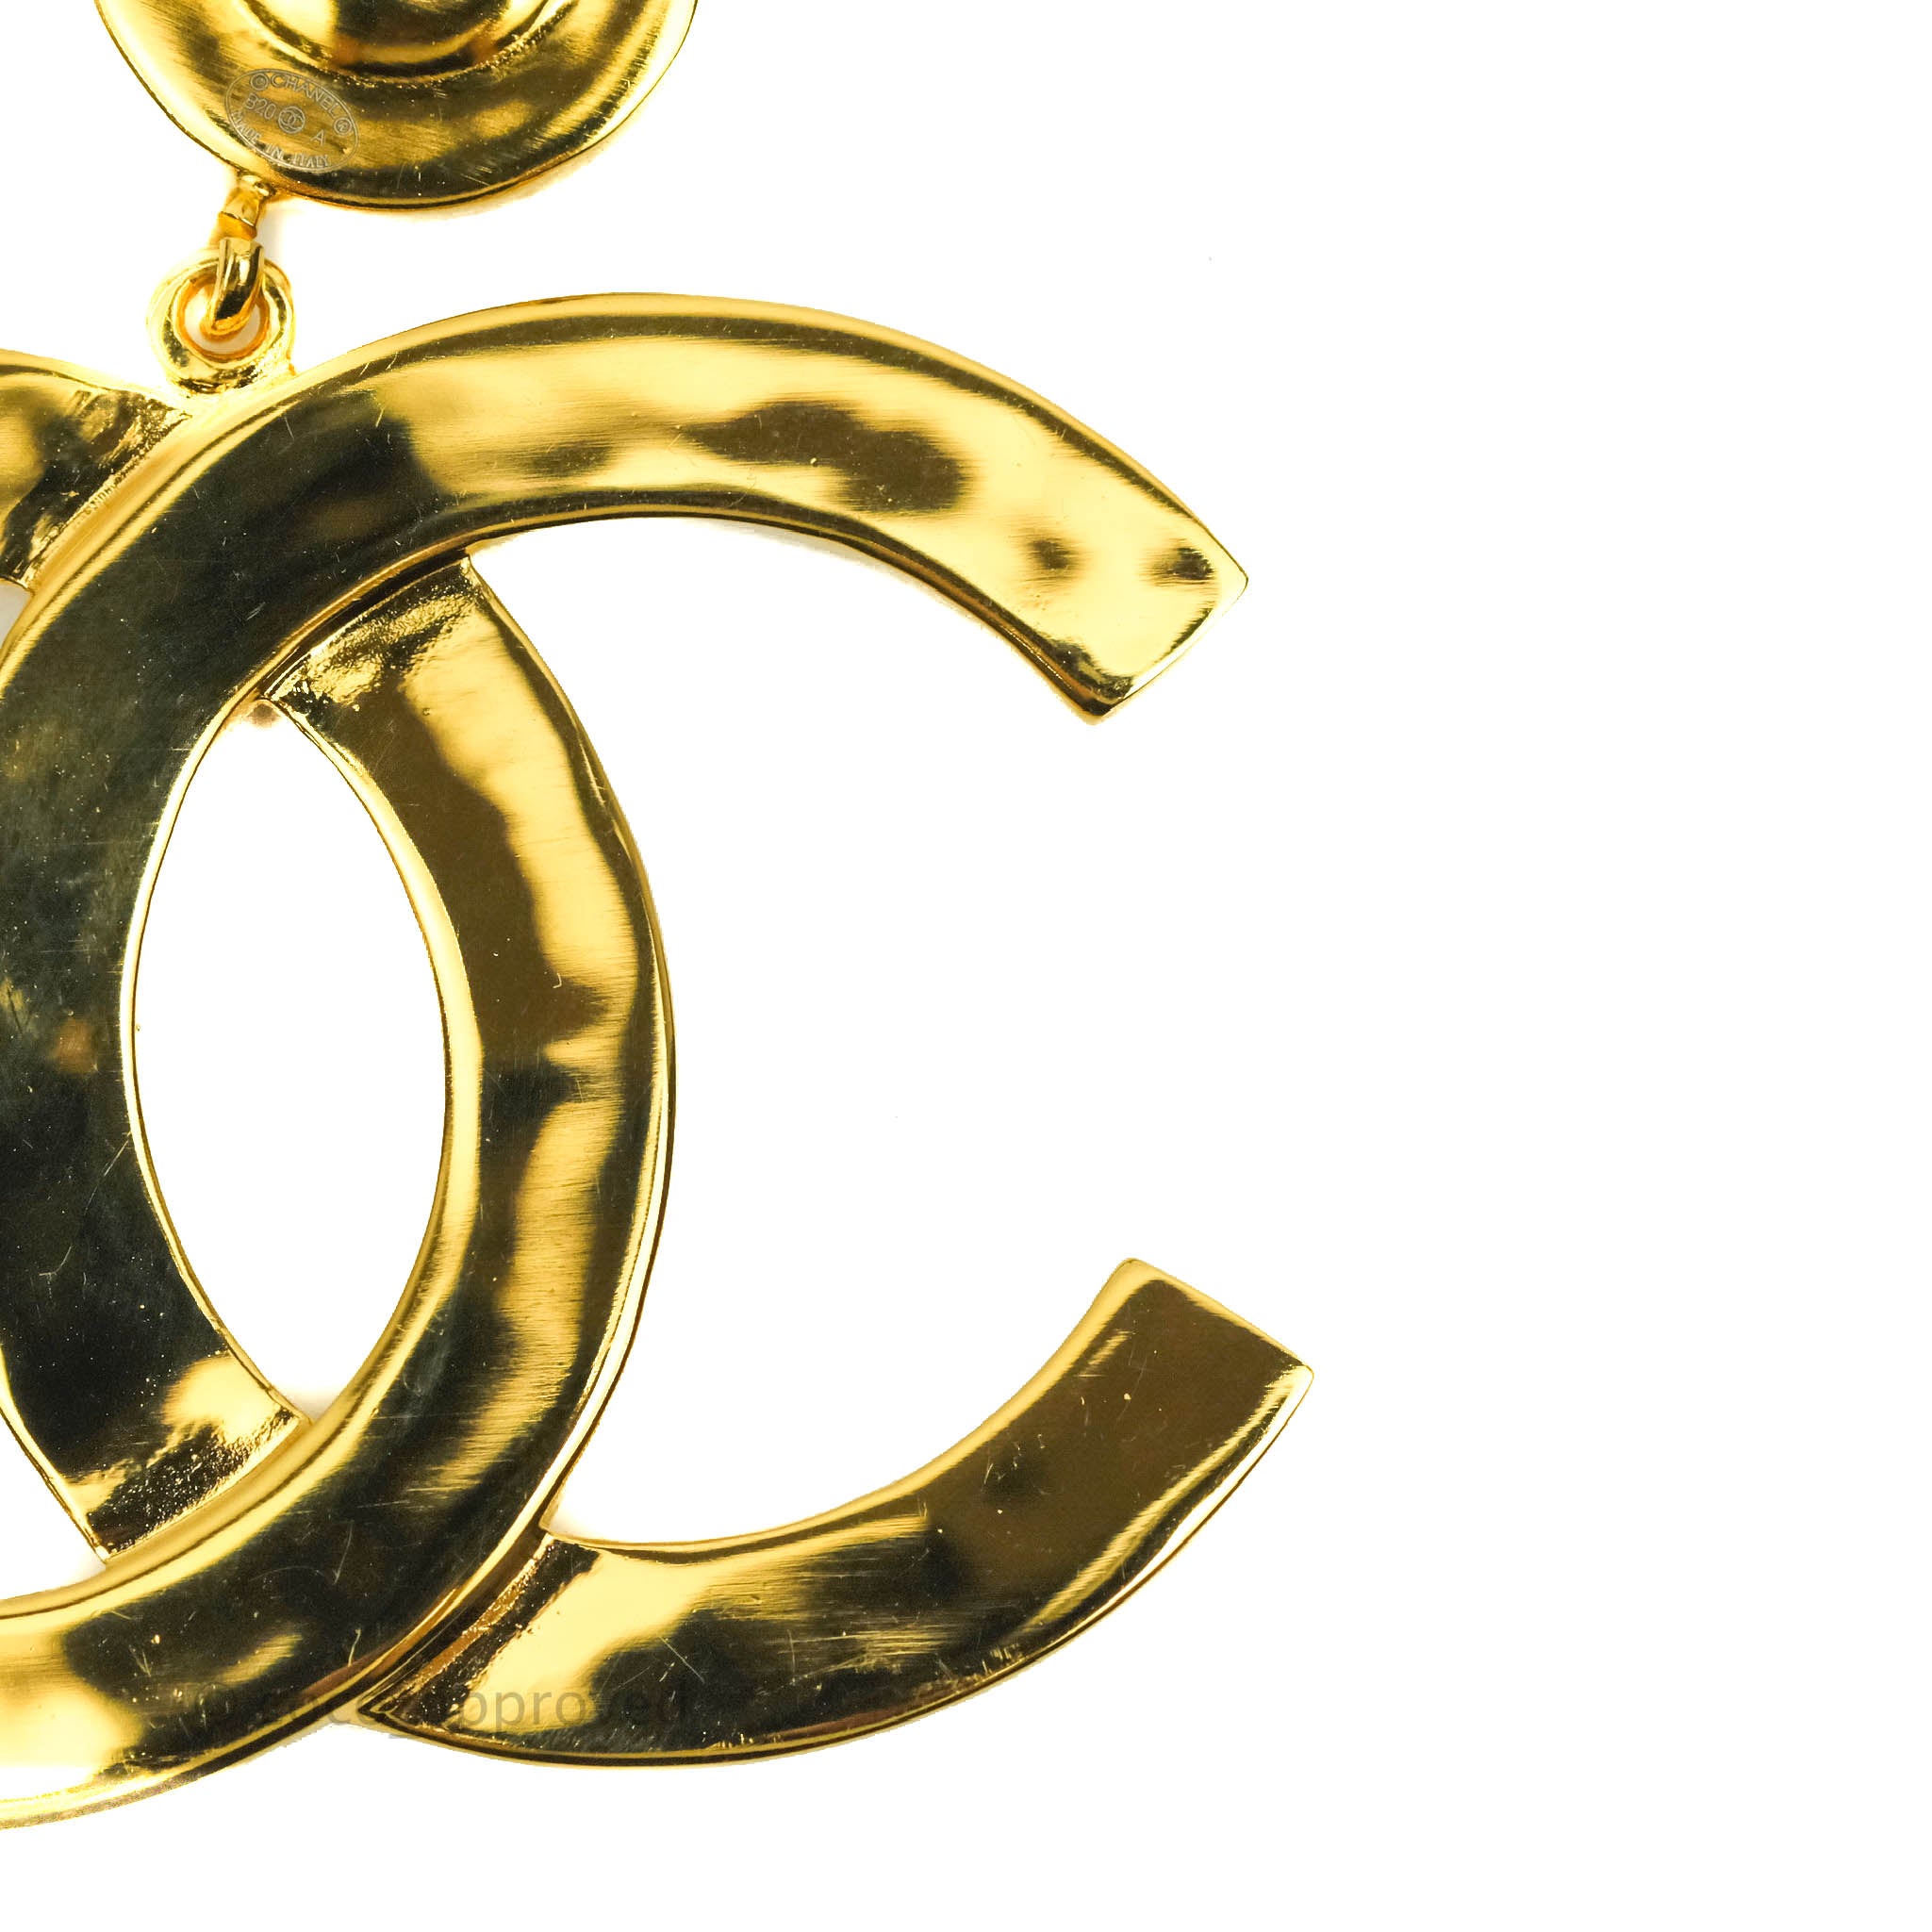 Chanel Large CC Button Drop Earrings Gold Tone 20A – Coco Approved Studio